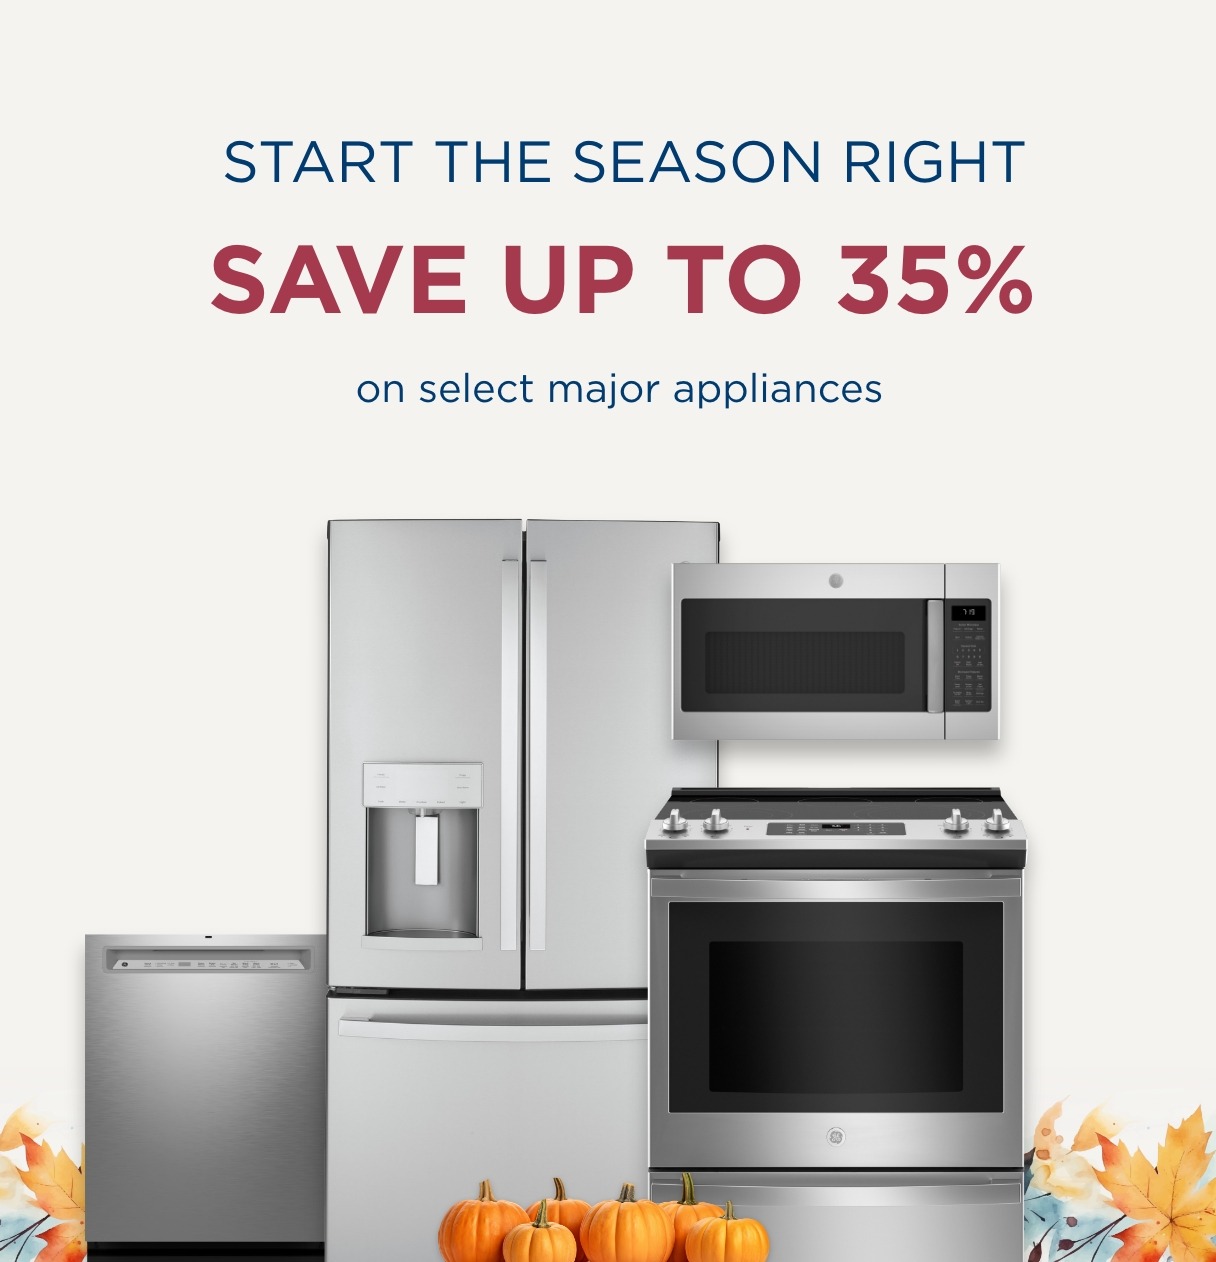 Start the Season Right - Save up to 35% OFF select major appliances